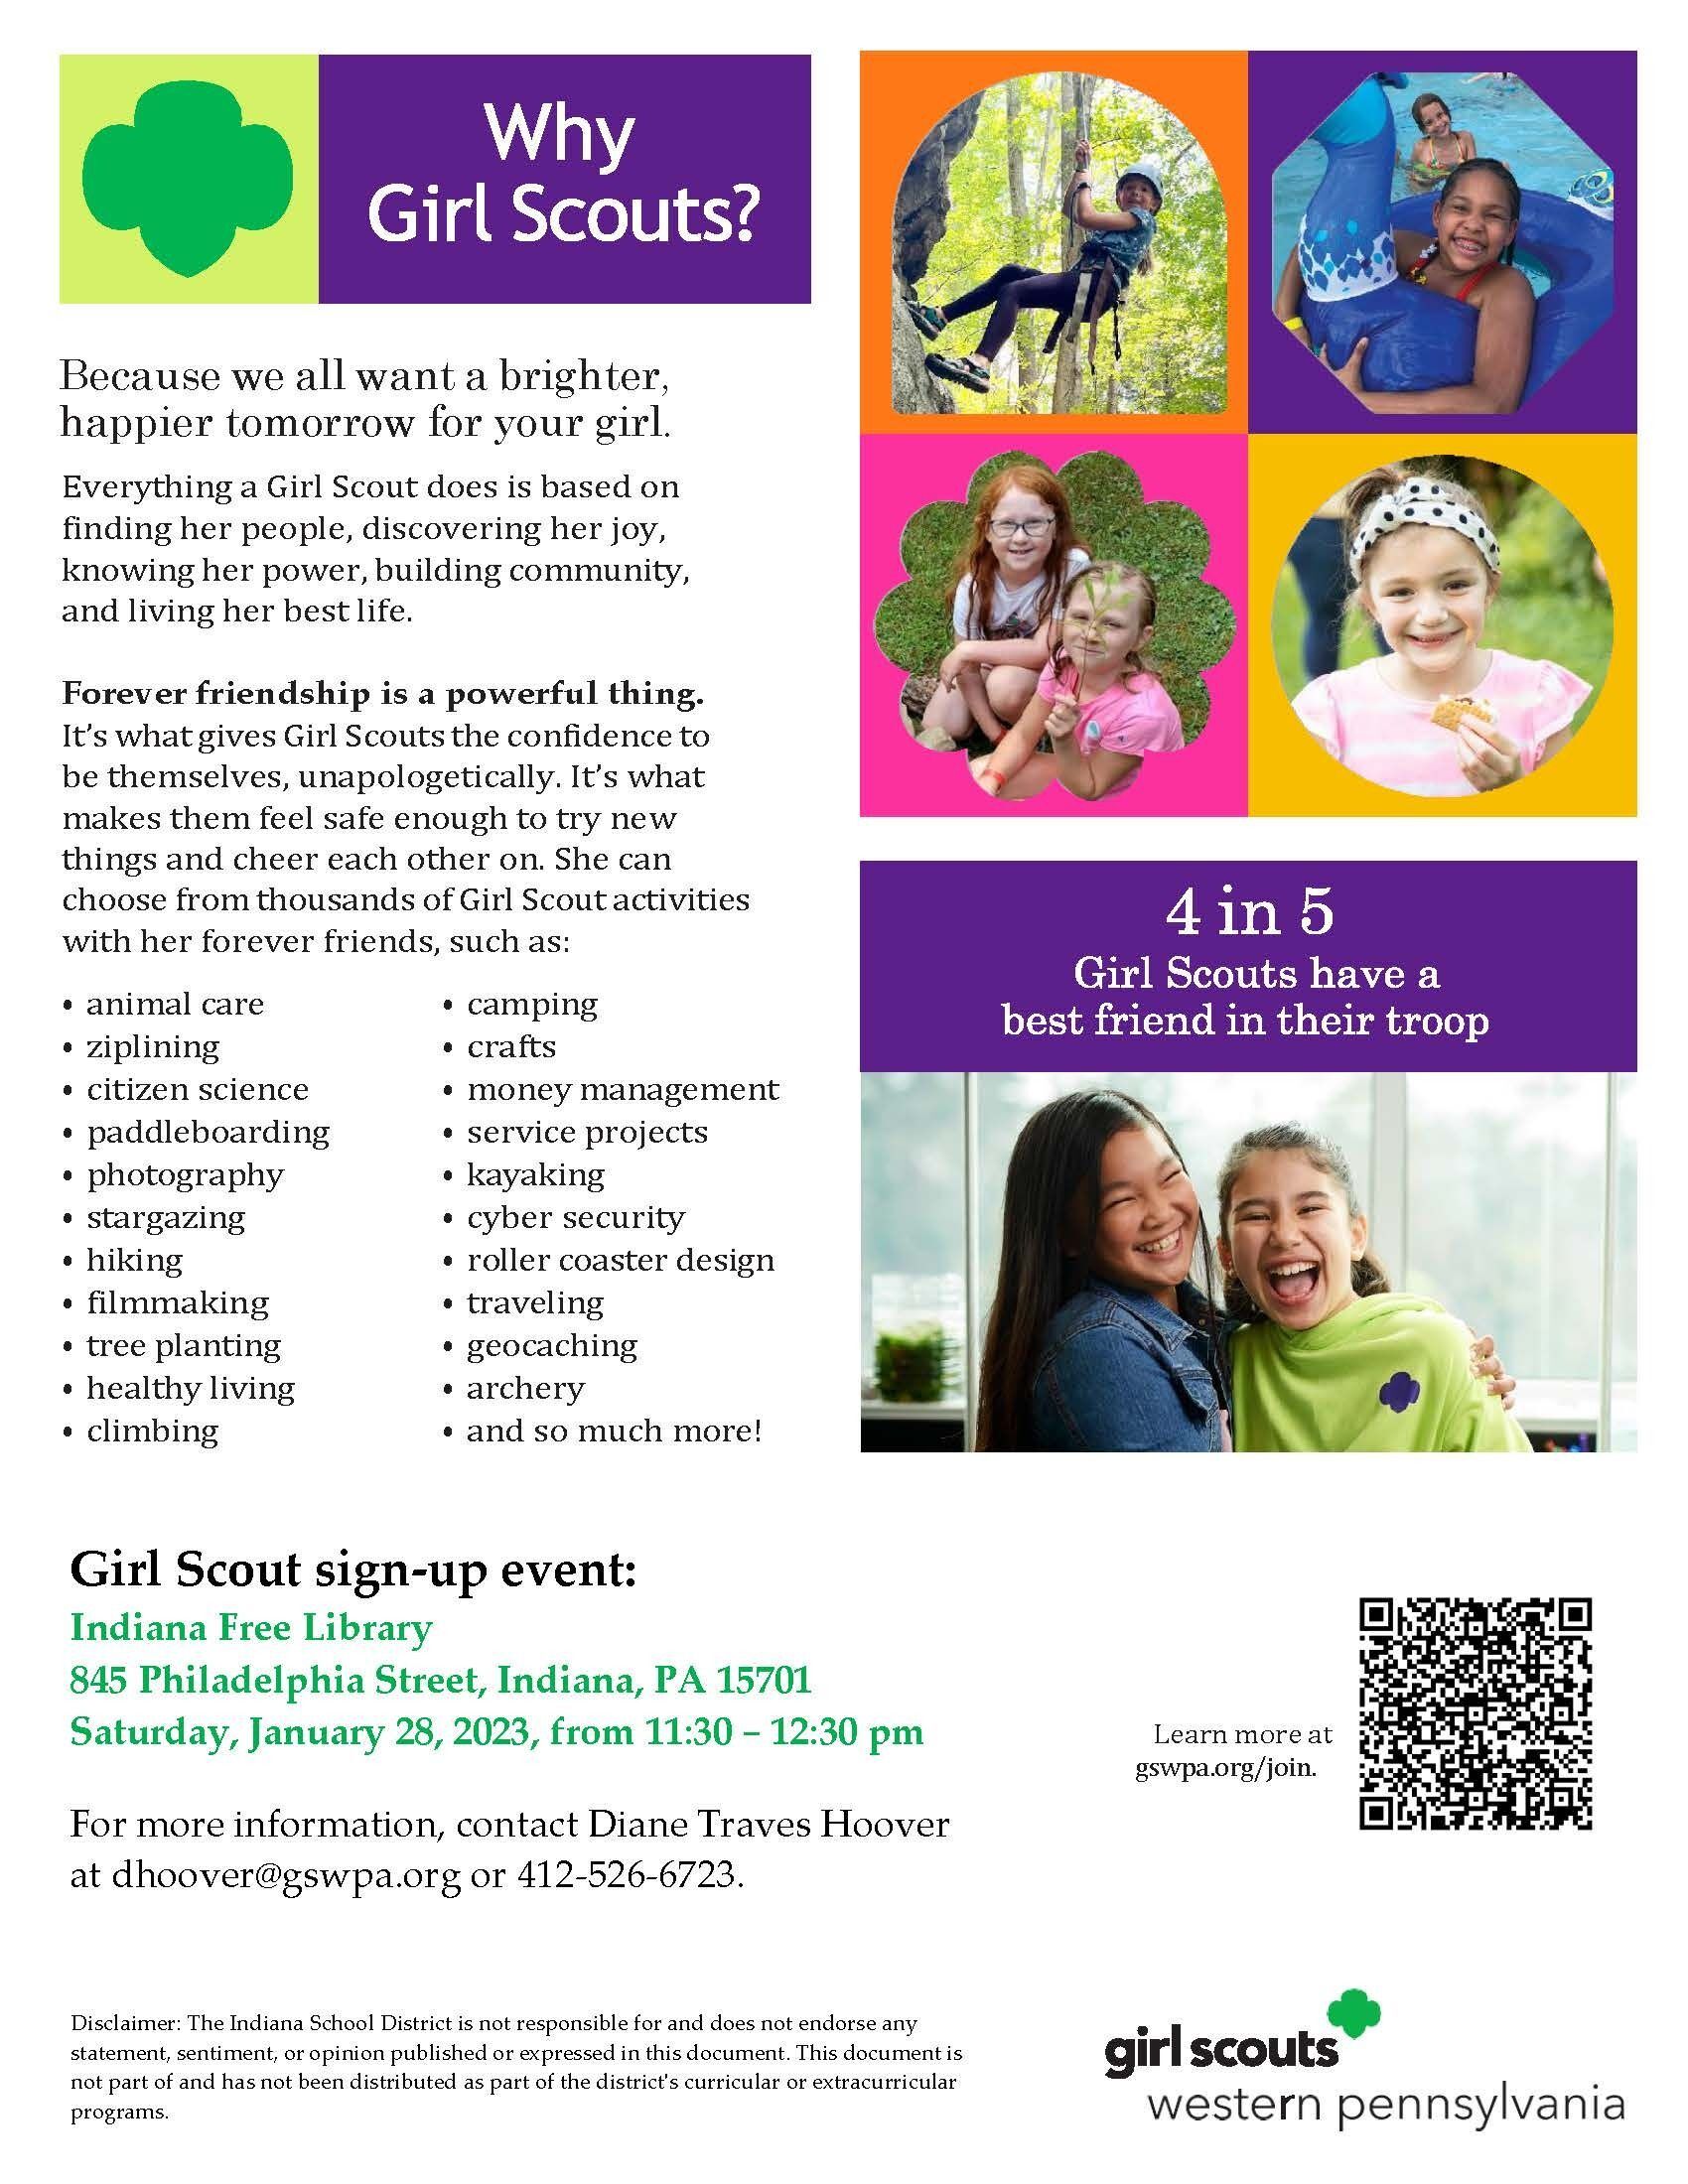 Girl Scout Sign-up Day at the Library on January 28th!